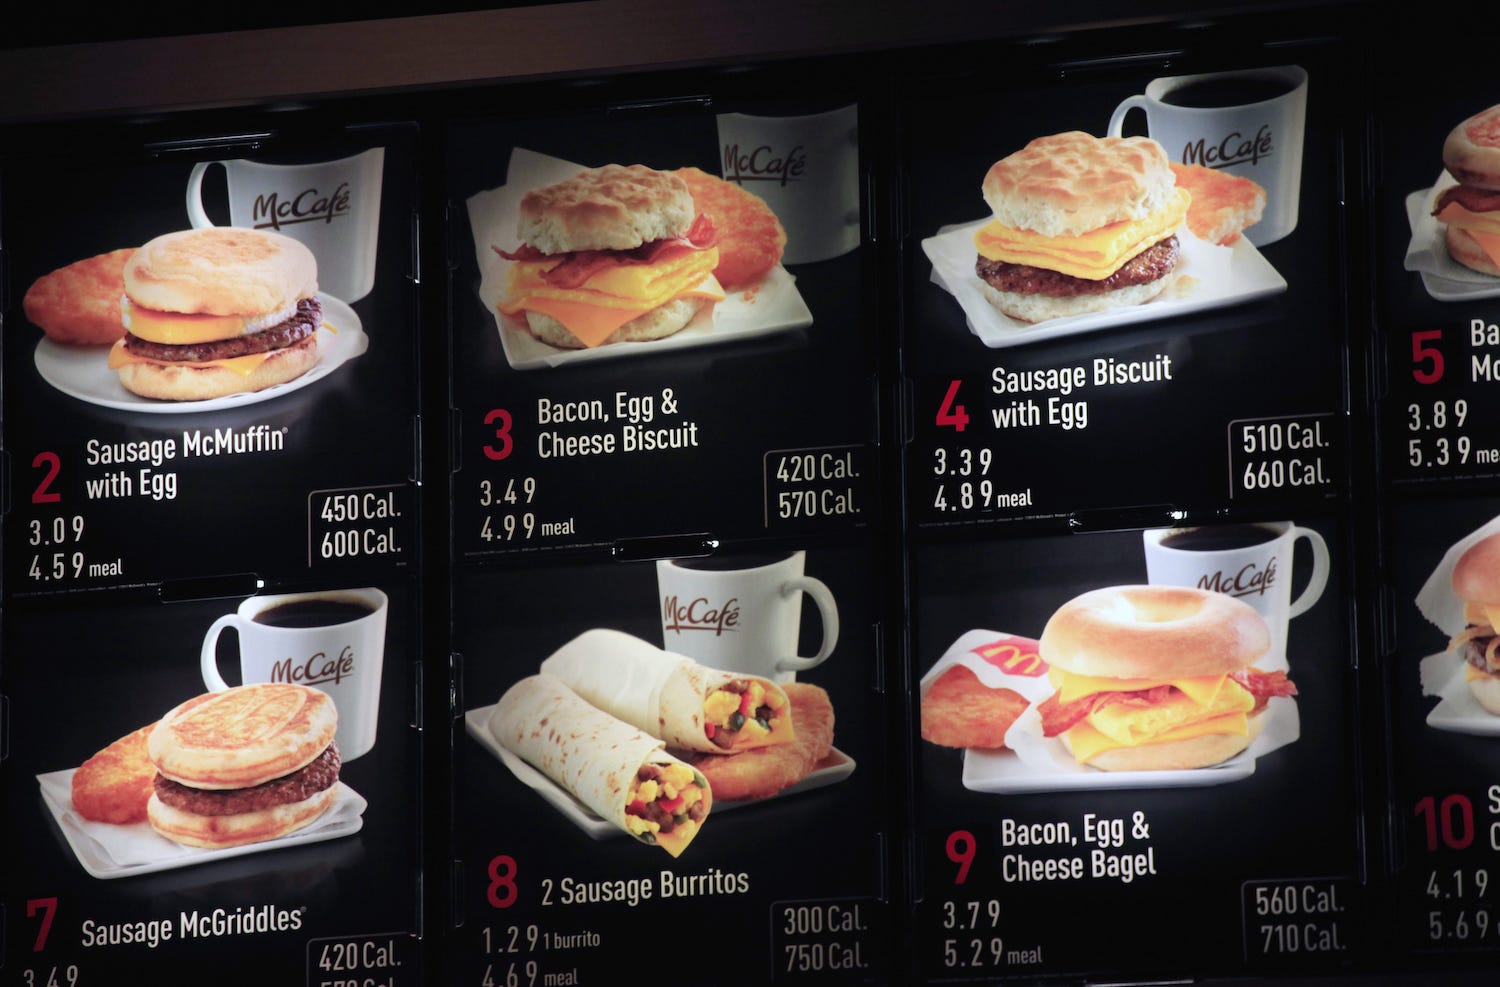 Items on the breakfast menu, including the calories, are posted at a McDonald's restaurant in New York. (June 2020)